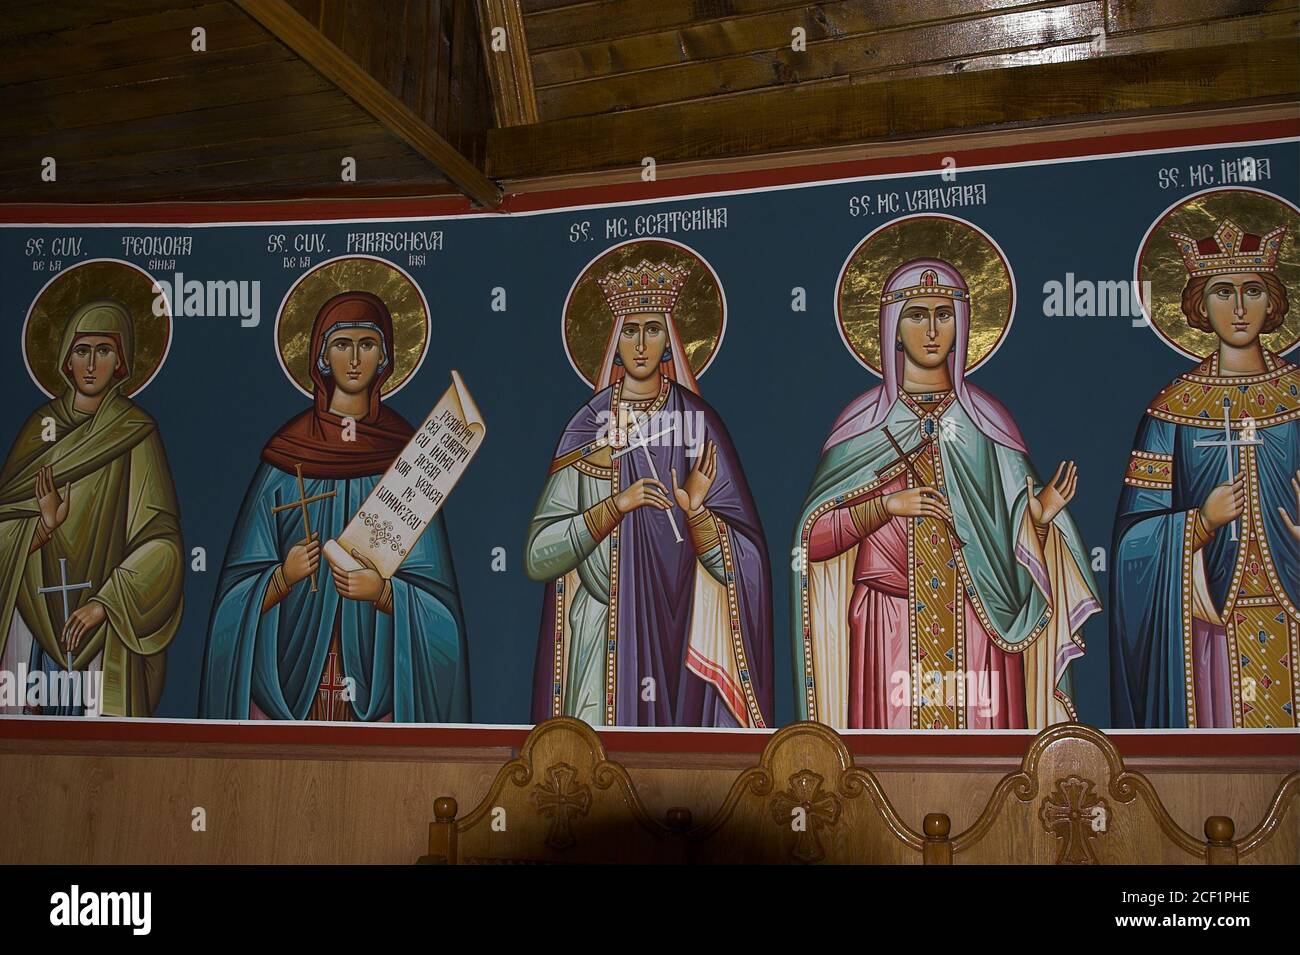 Romania, the interior of a wooden Orthodox church, contemporary icons of holy women. Das Innere einer orthodoxen Holzkirche, Ikonen heiliger Frauen. Stock Photo